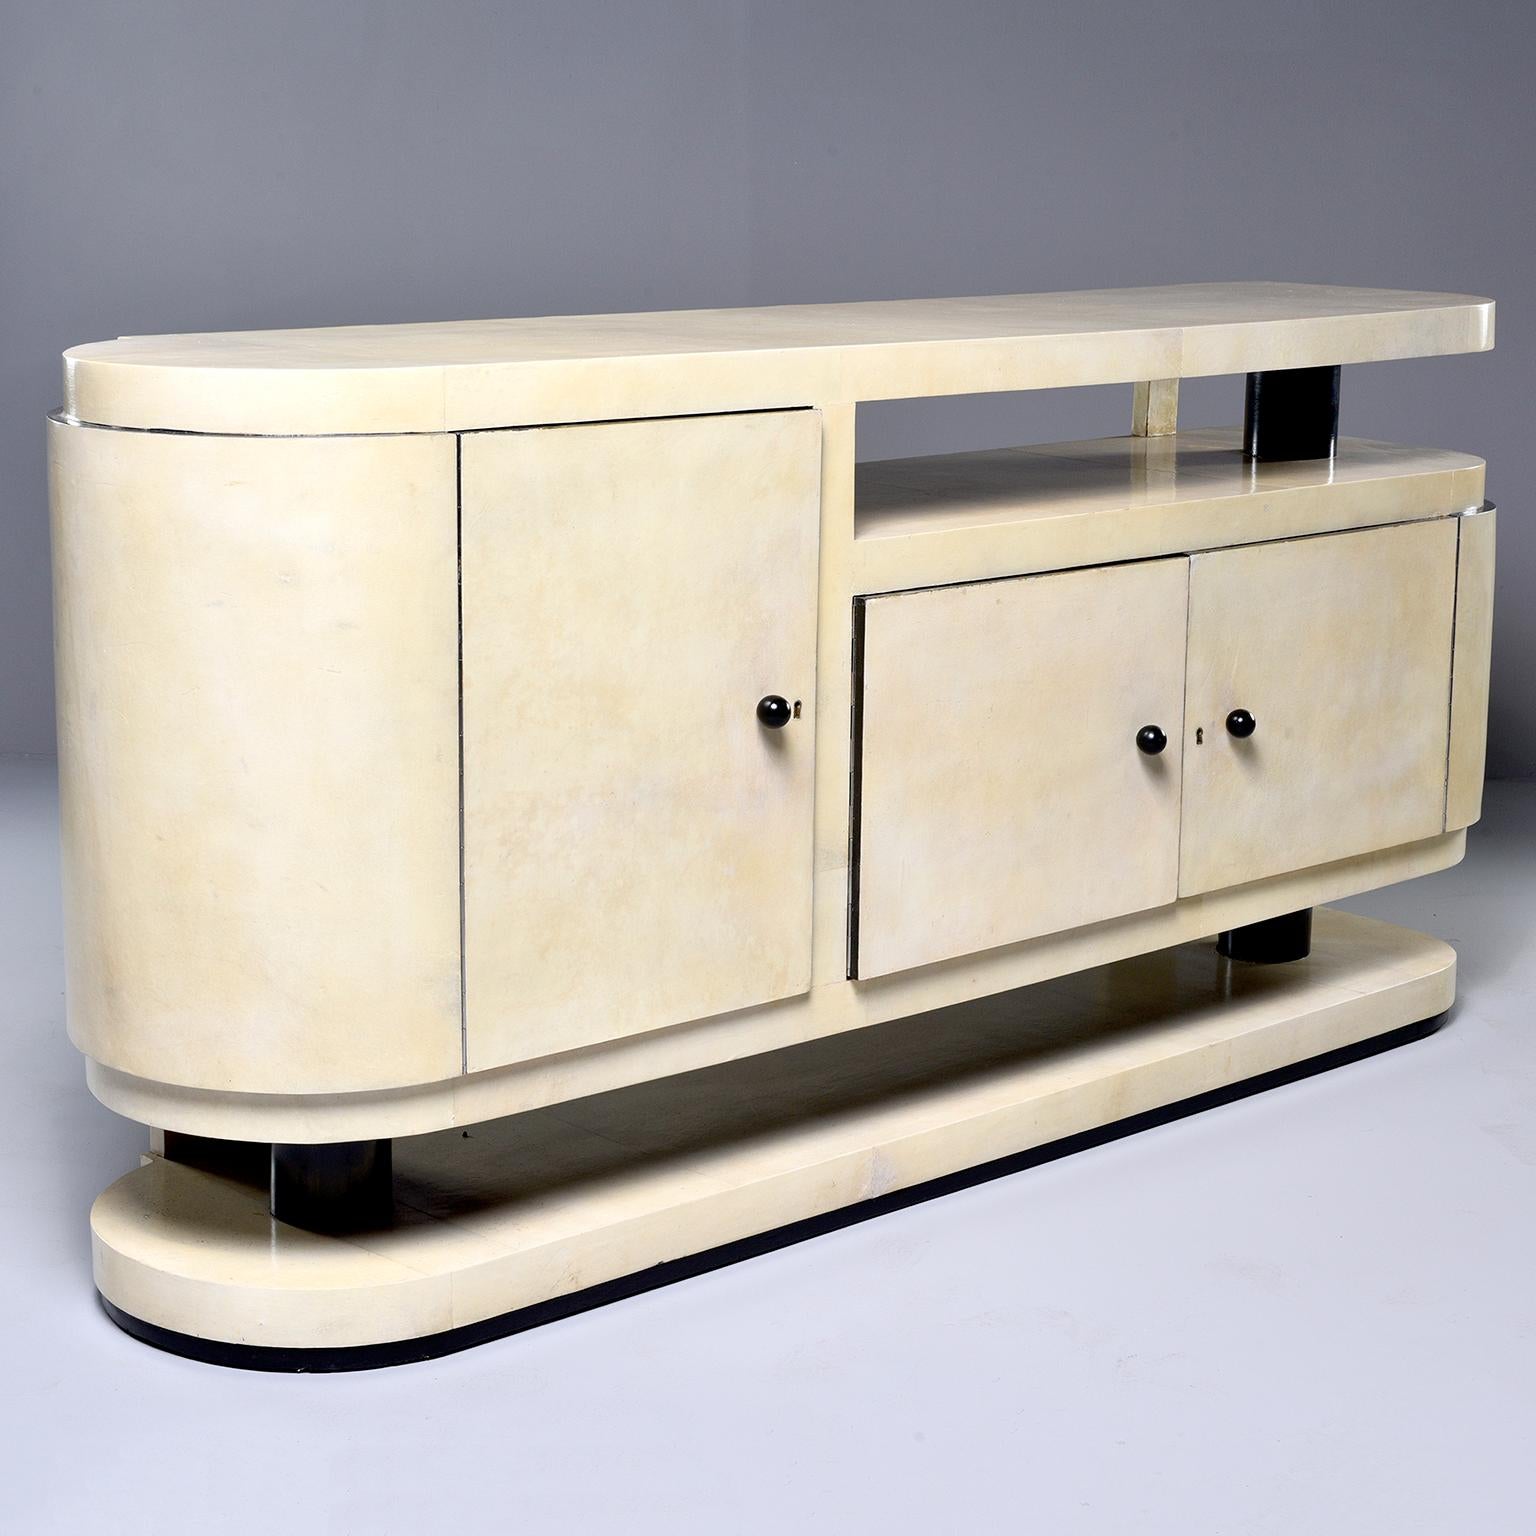 Italian sideboard or buffet is wood and completely covered in cream colored vellum, circa 1960s. One side has a tall cabinet with one internal shelf and the other side has a low two-door cabinet. Curved pedestal base that the cabinet appears to